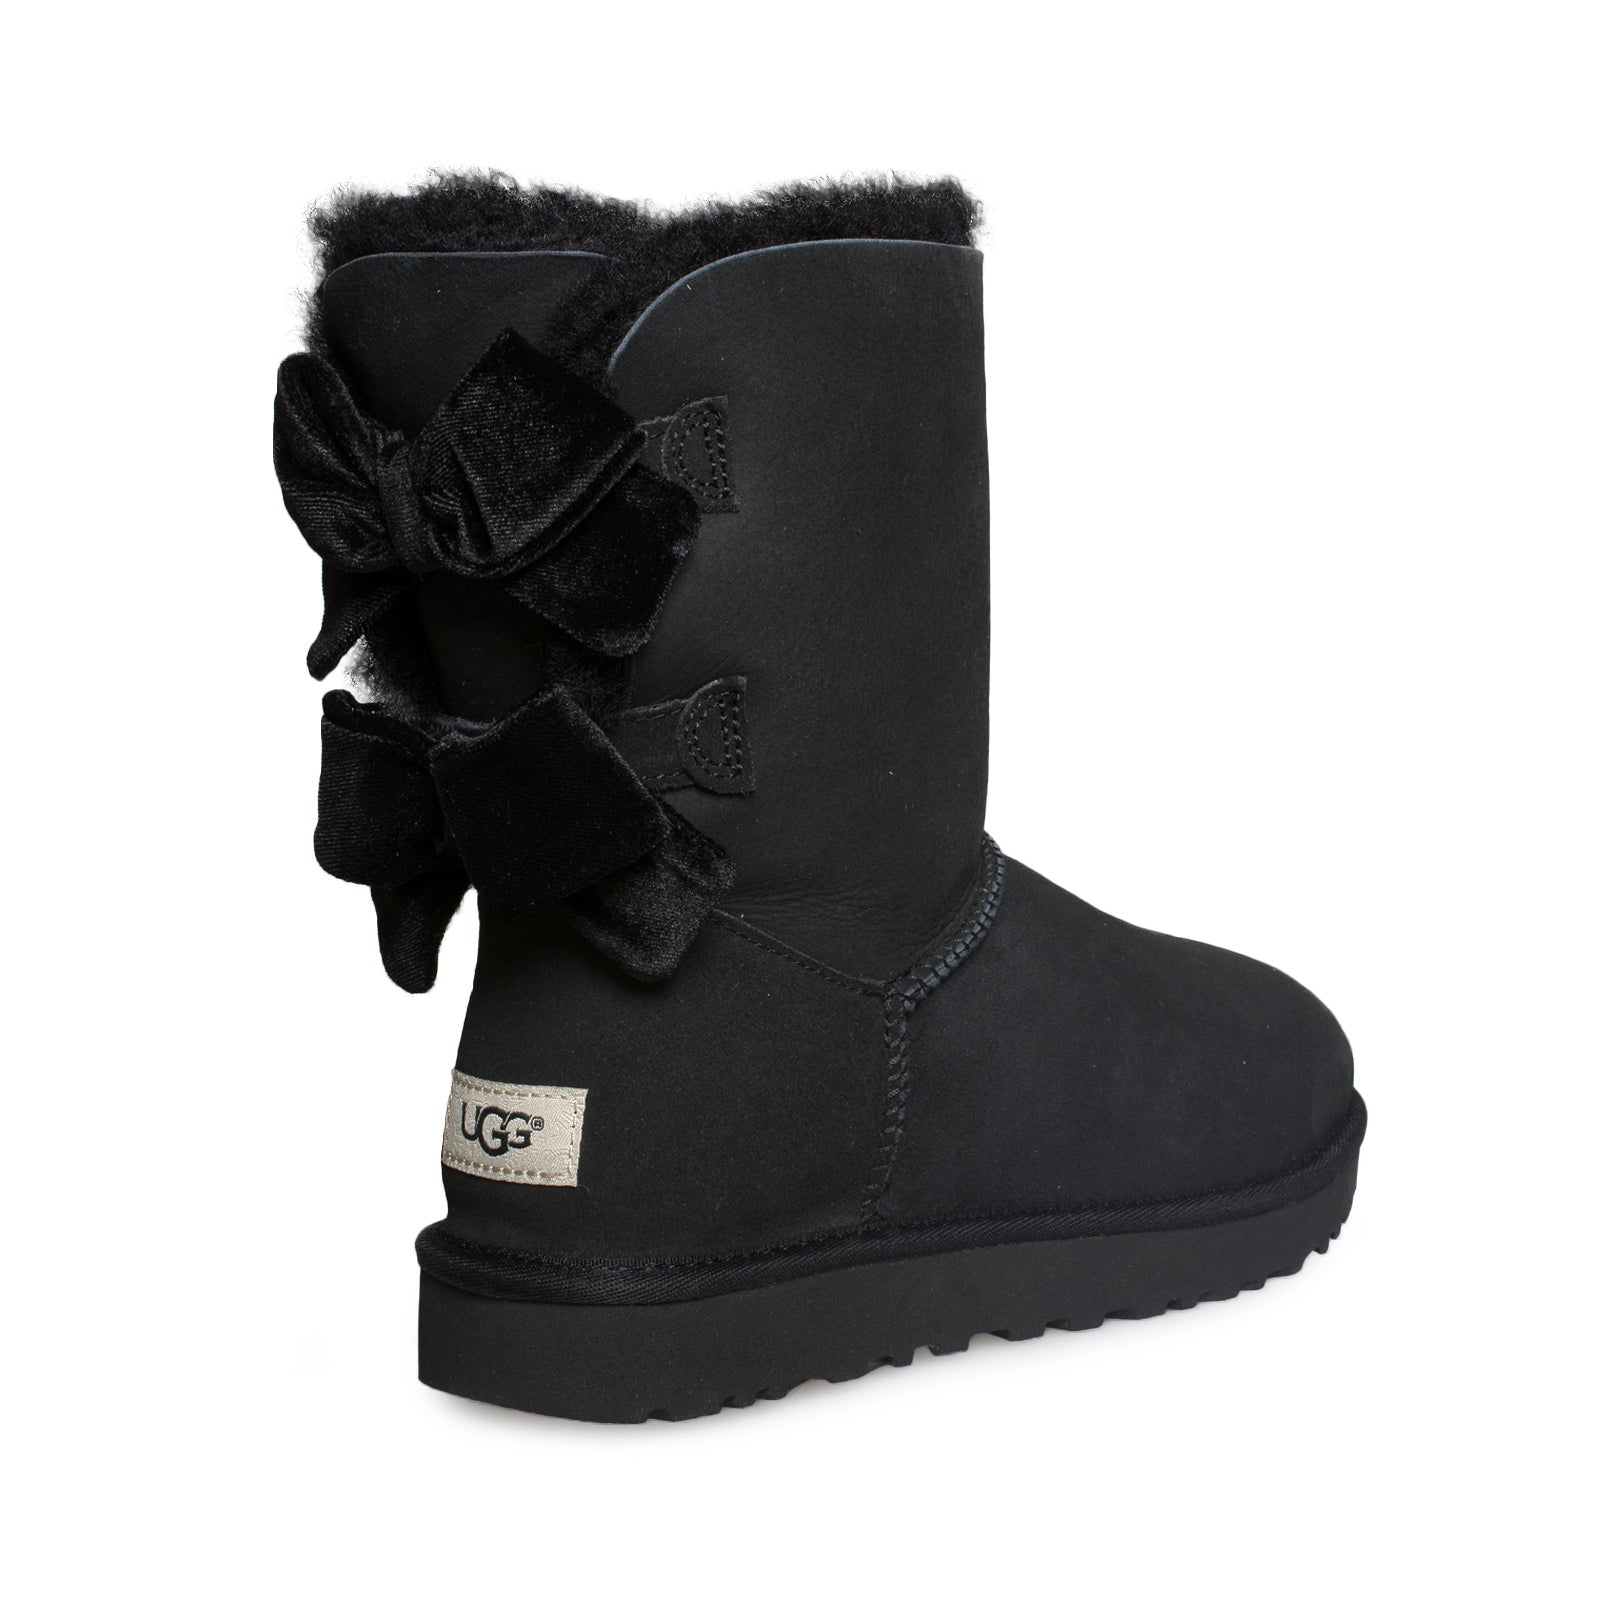 black ugg boots with bows on back